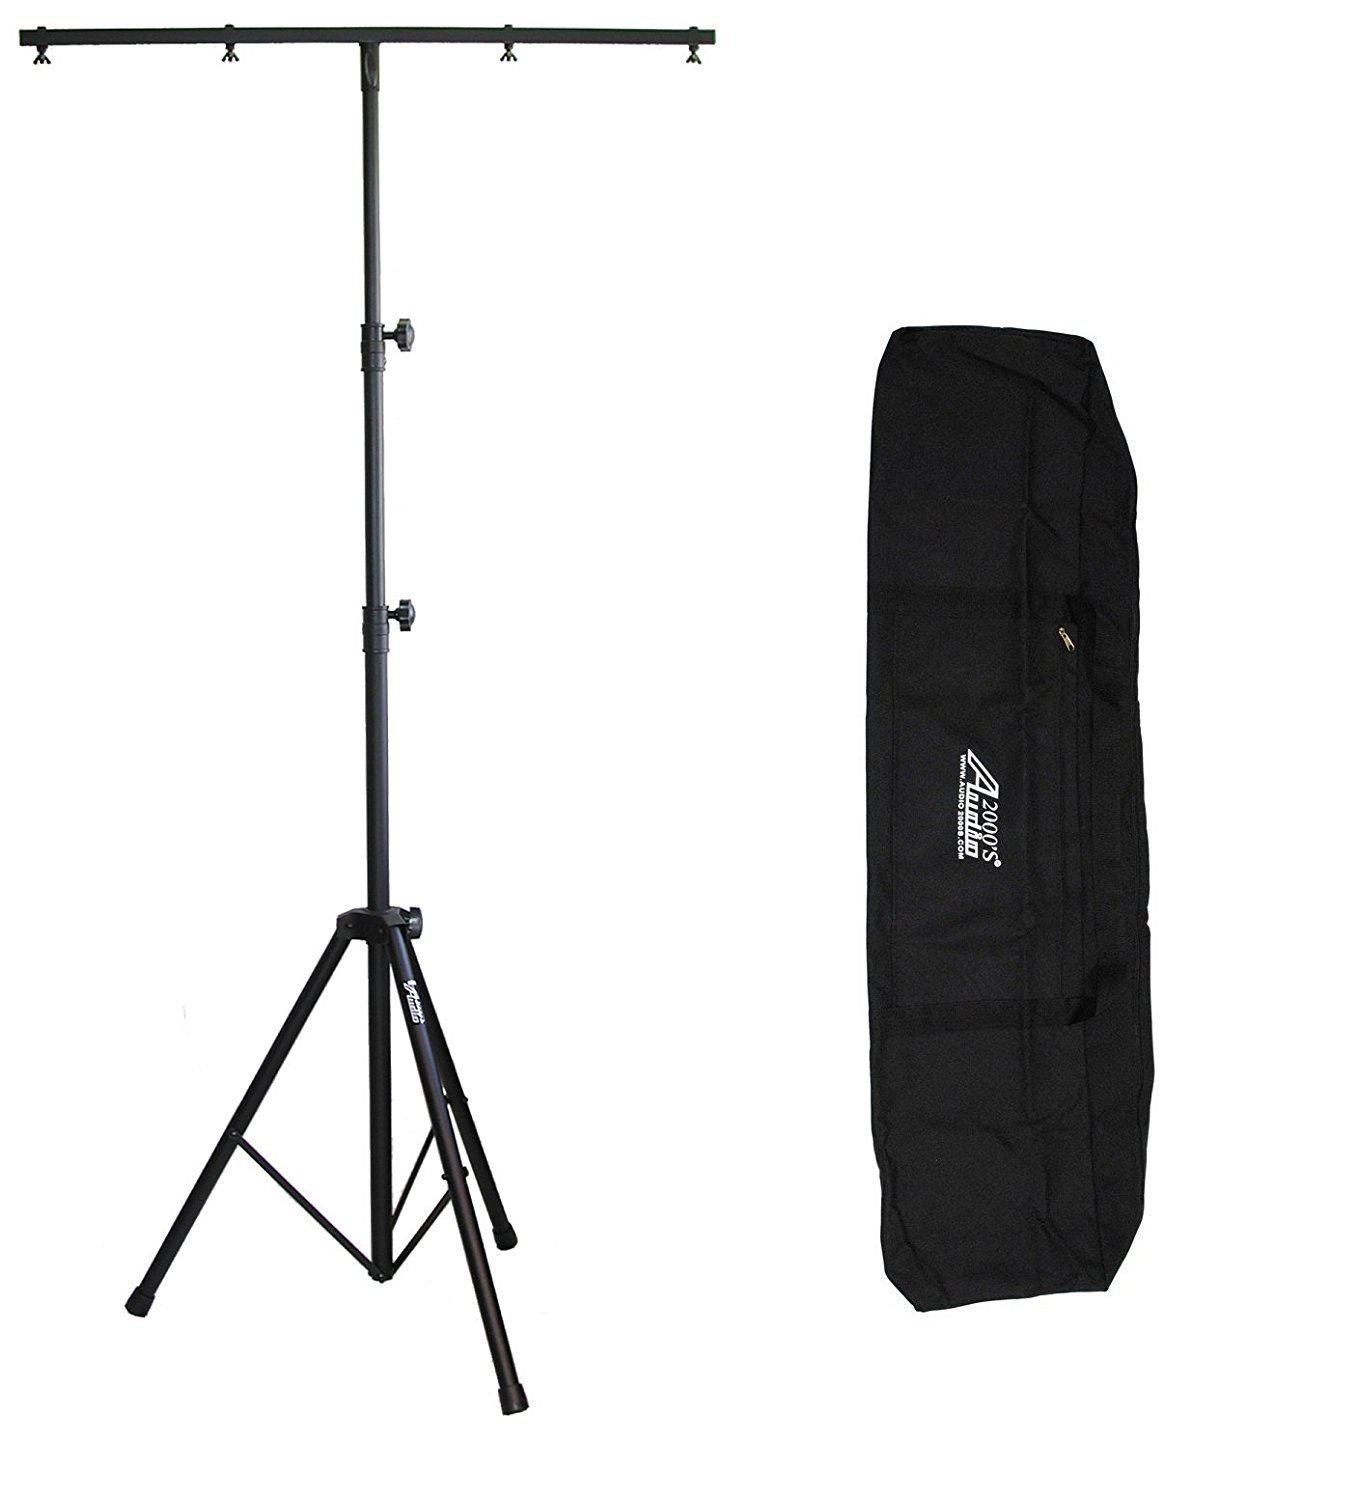 Audio 2000S ast4421a professional lighting stand with t-bar and carrying bag